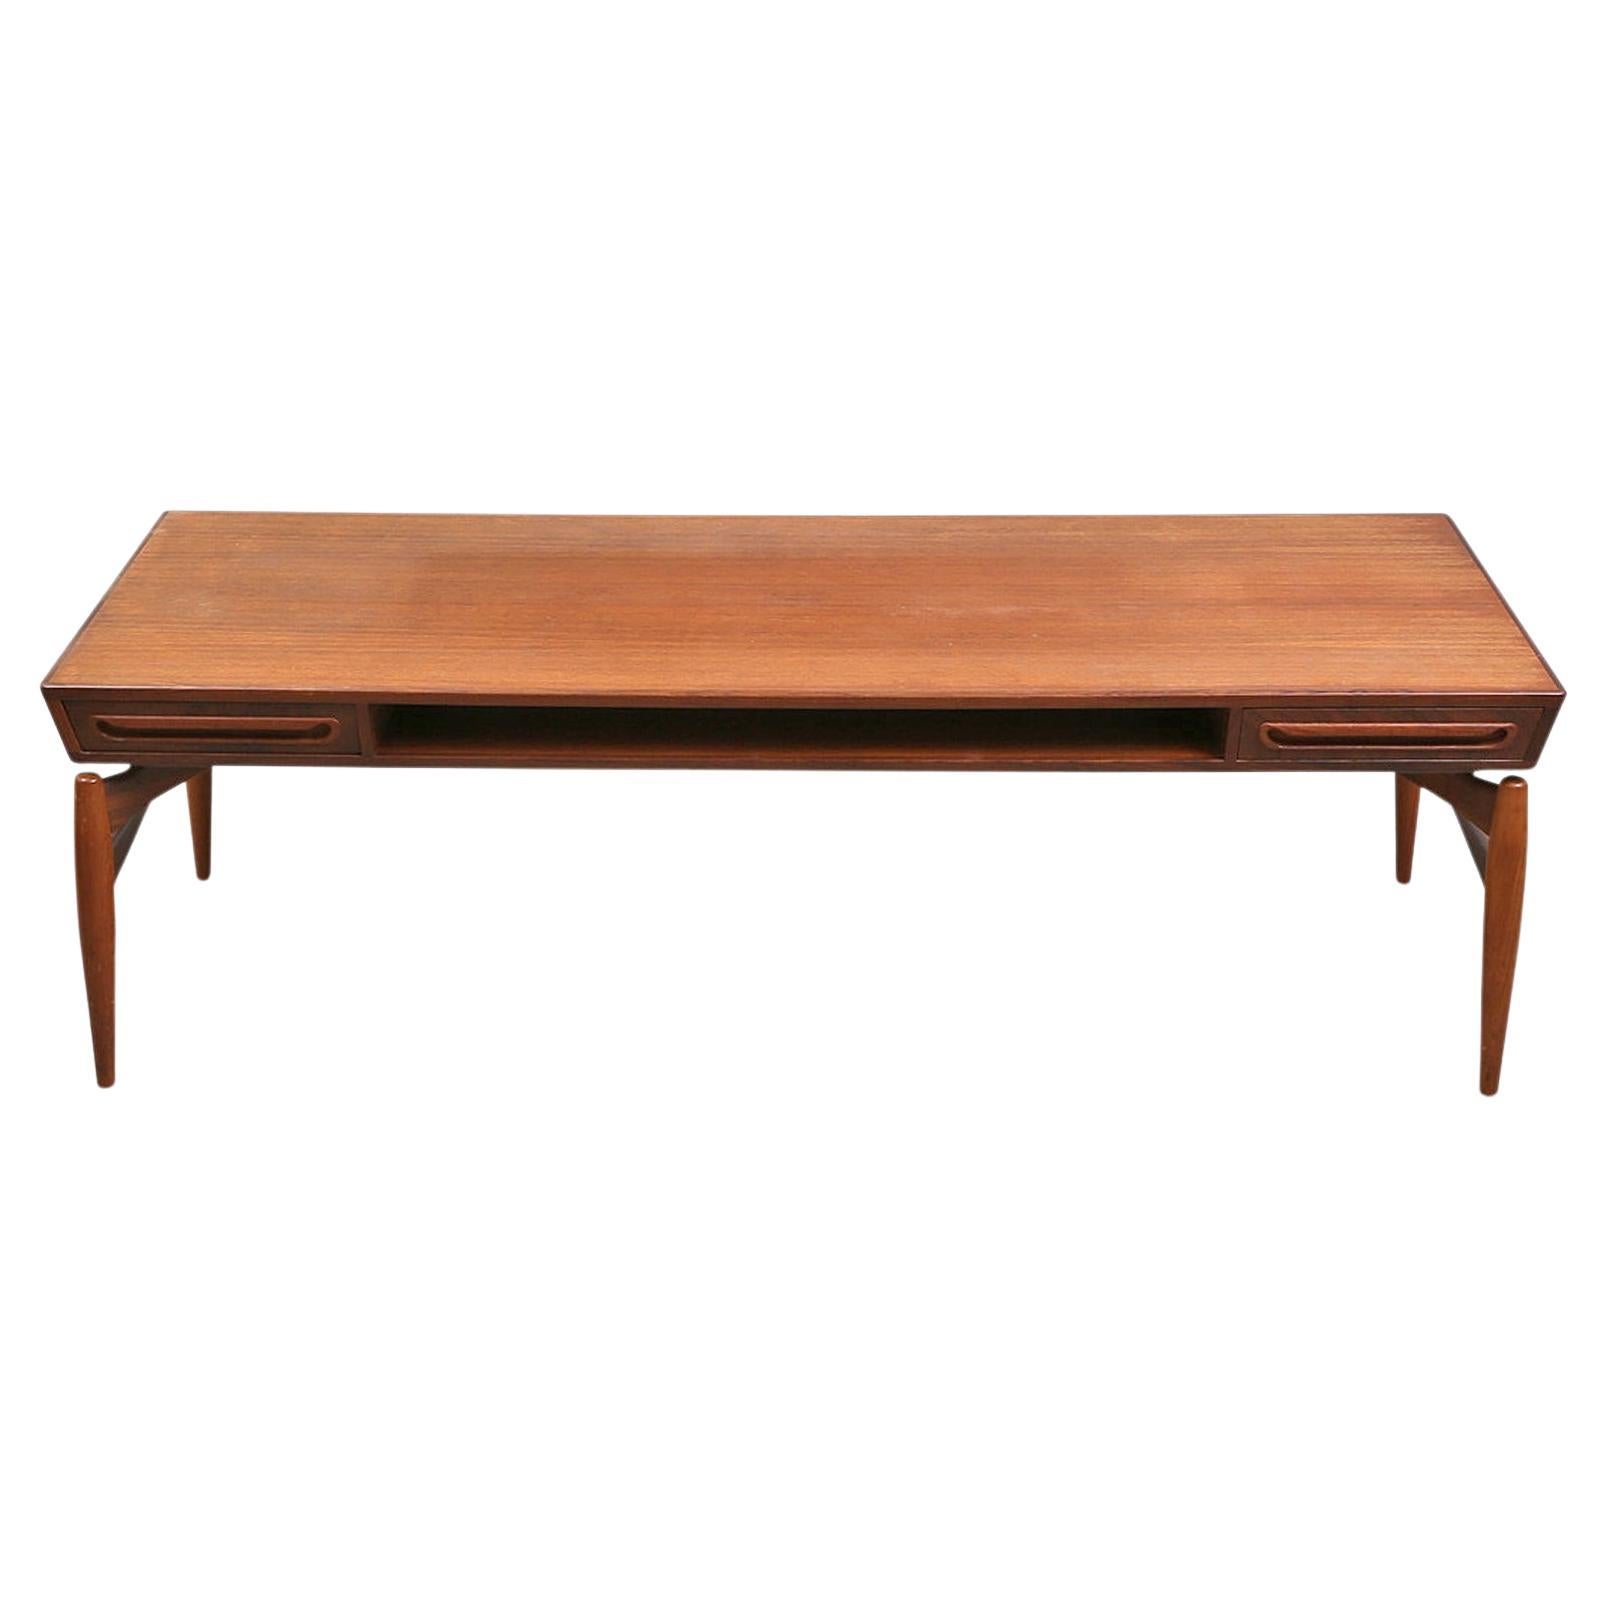 Johannes Andersen Atomic Teak Coffee Table with Drawers For Sale